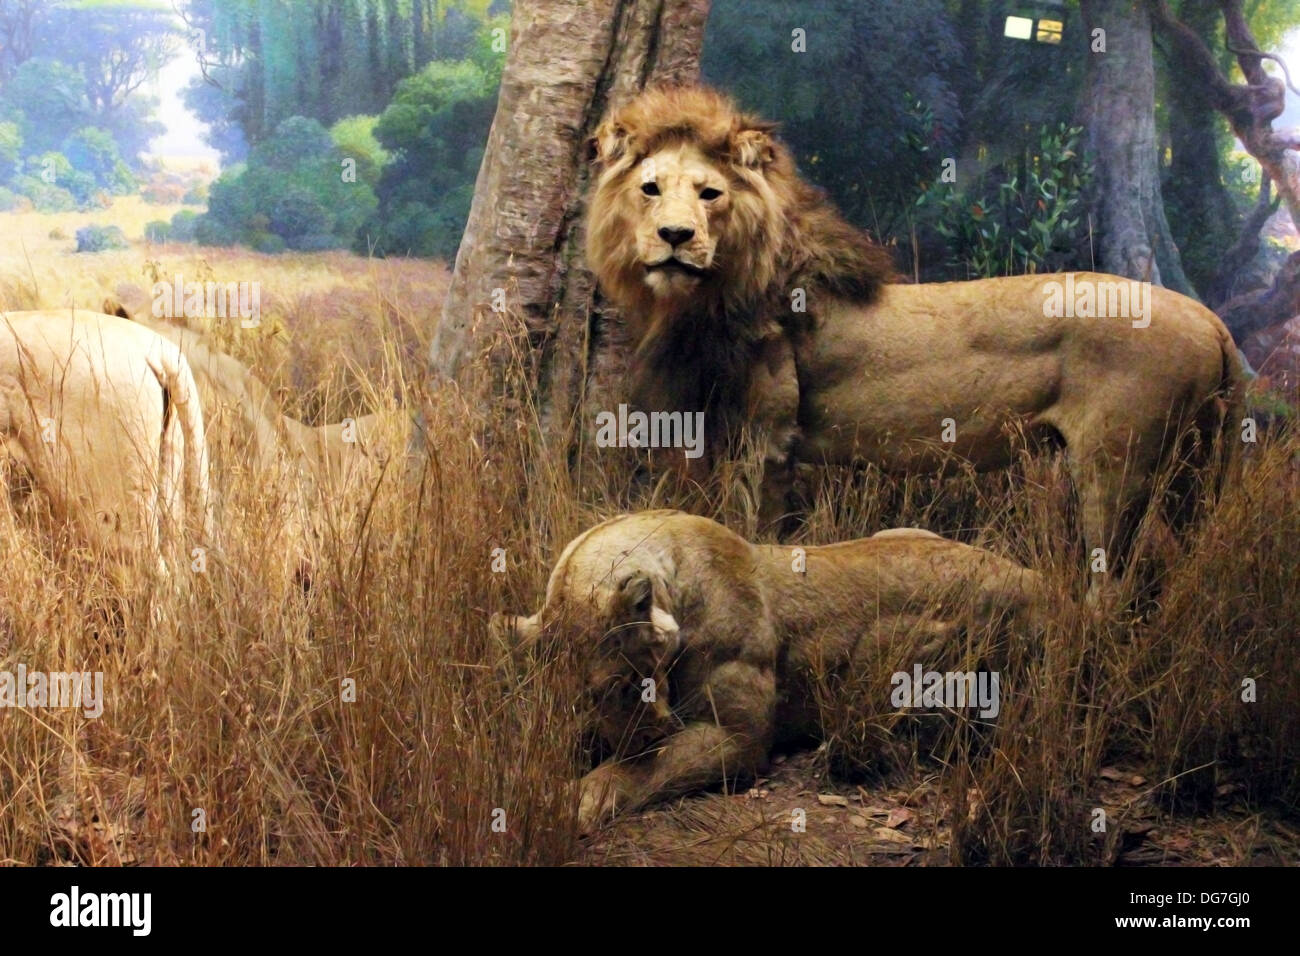 Diorama of the African Lion in the African Mammal Hall at the American Museum of Natural History in New York City. Stock Photo